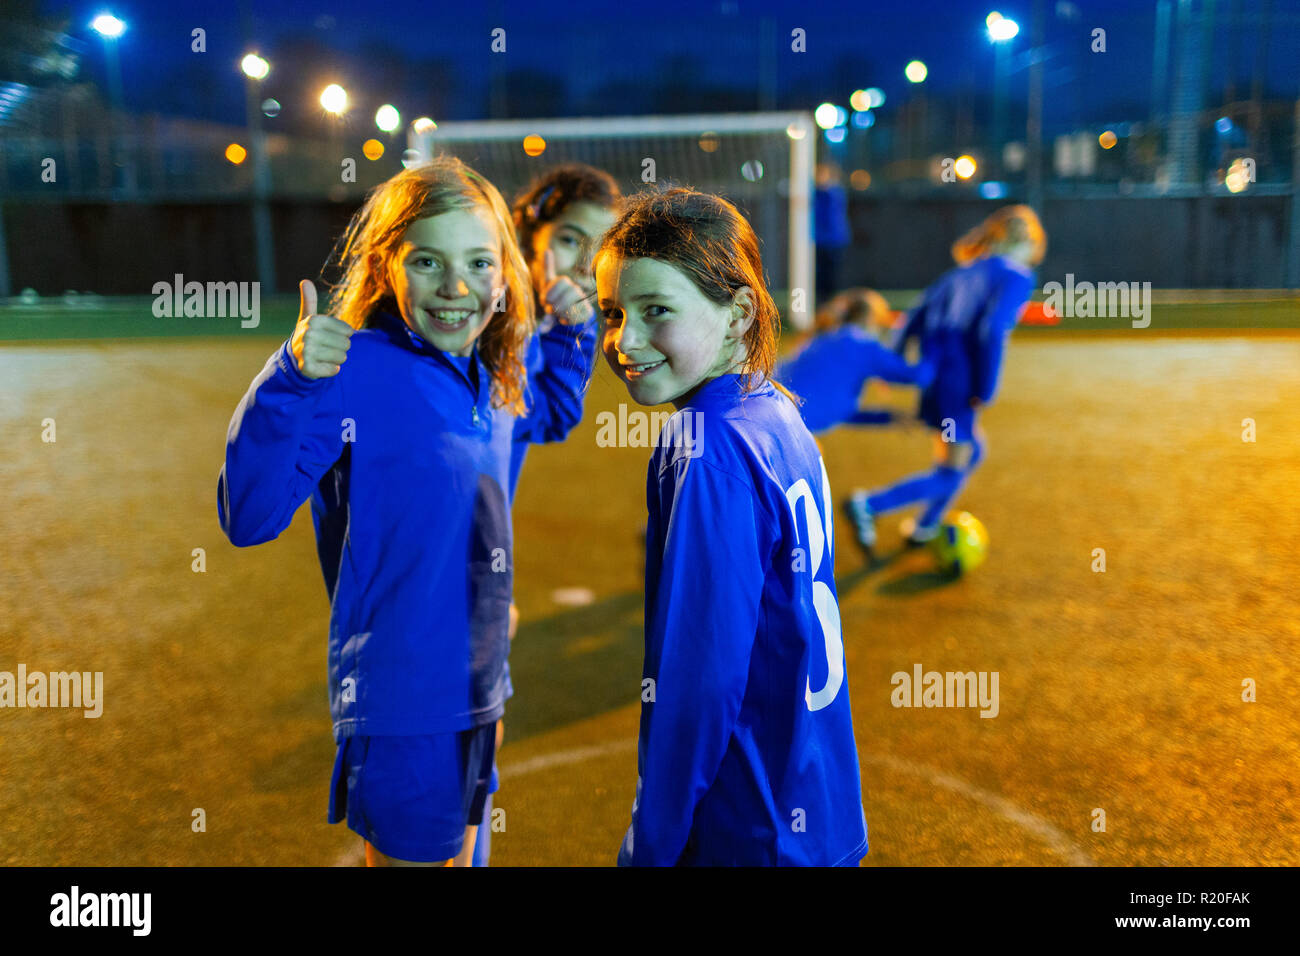 Portrait confiant girl playing soccer, gesturing thumbs-up Banque D'Images